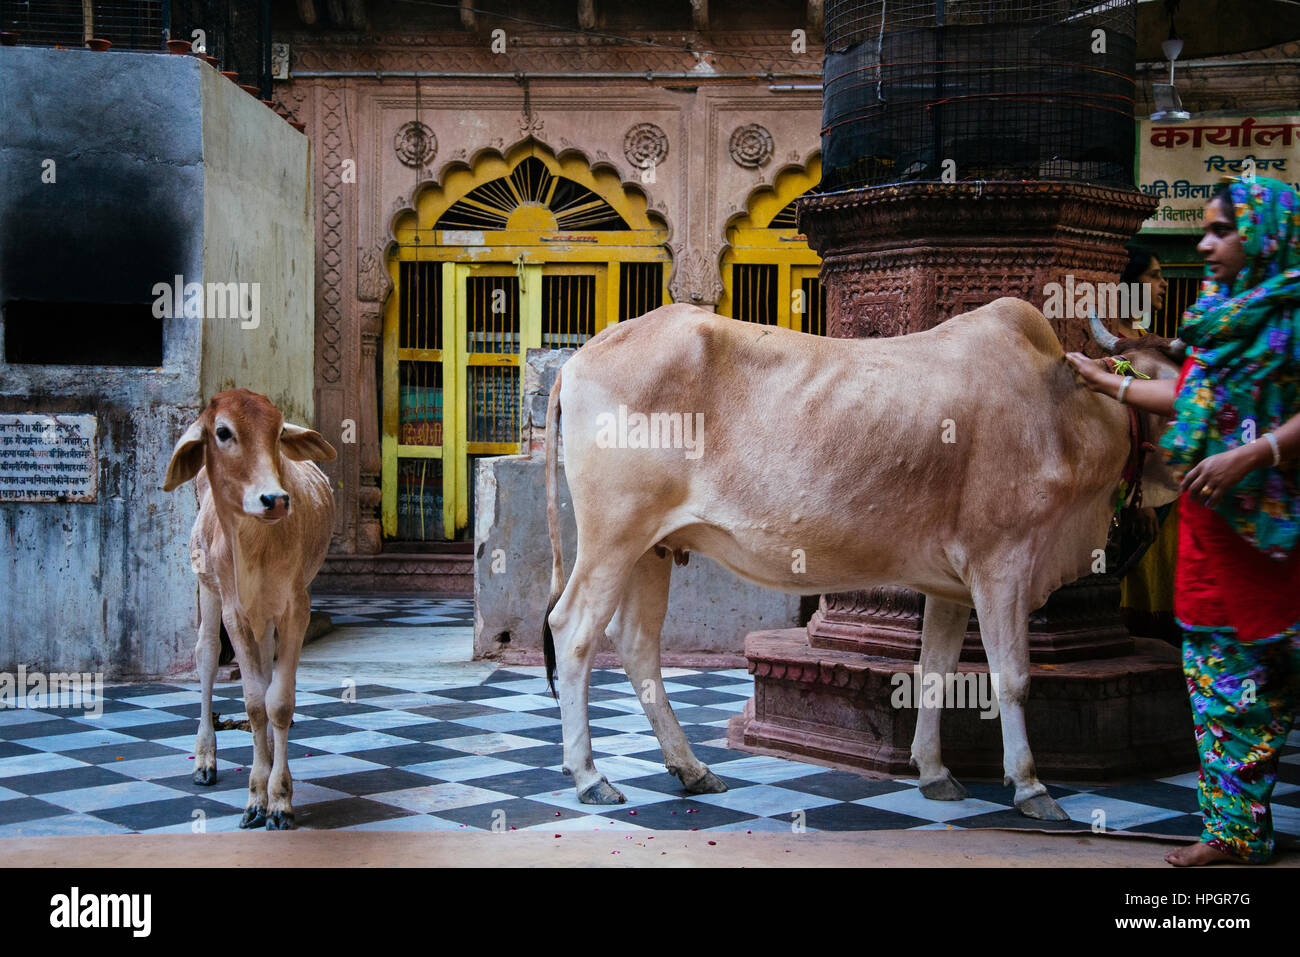 Cow and her calf inside Hindu temple, Vrindavan, India. Stock Photo